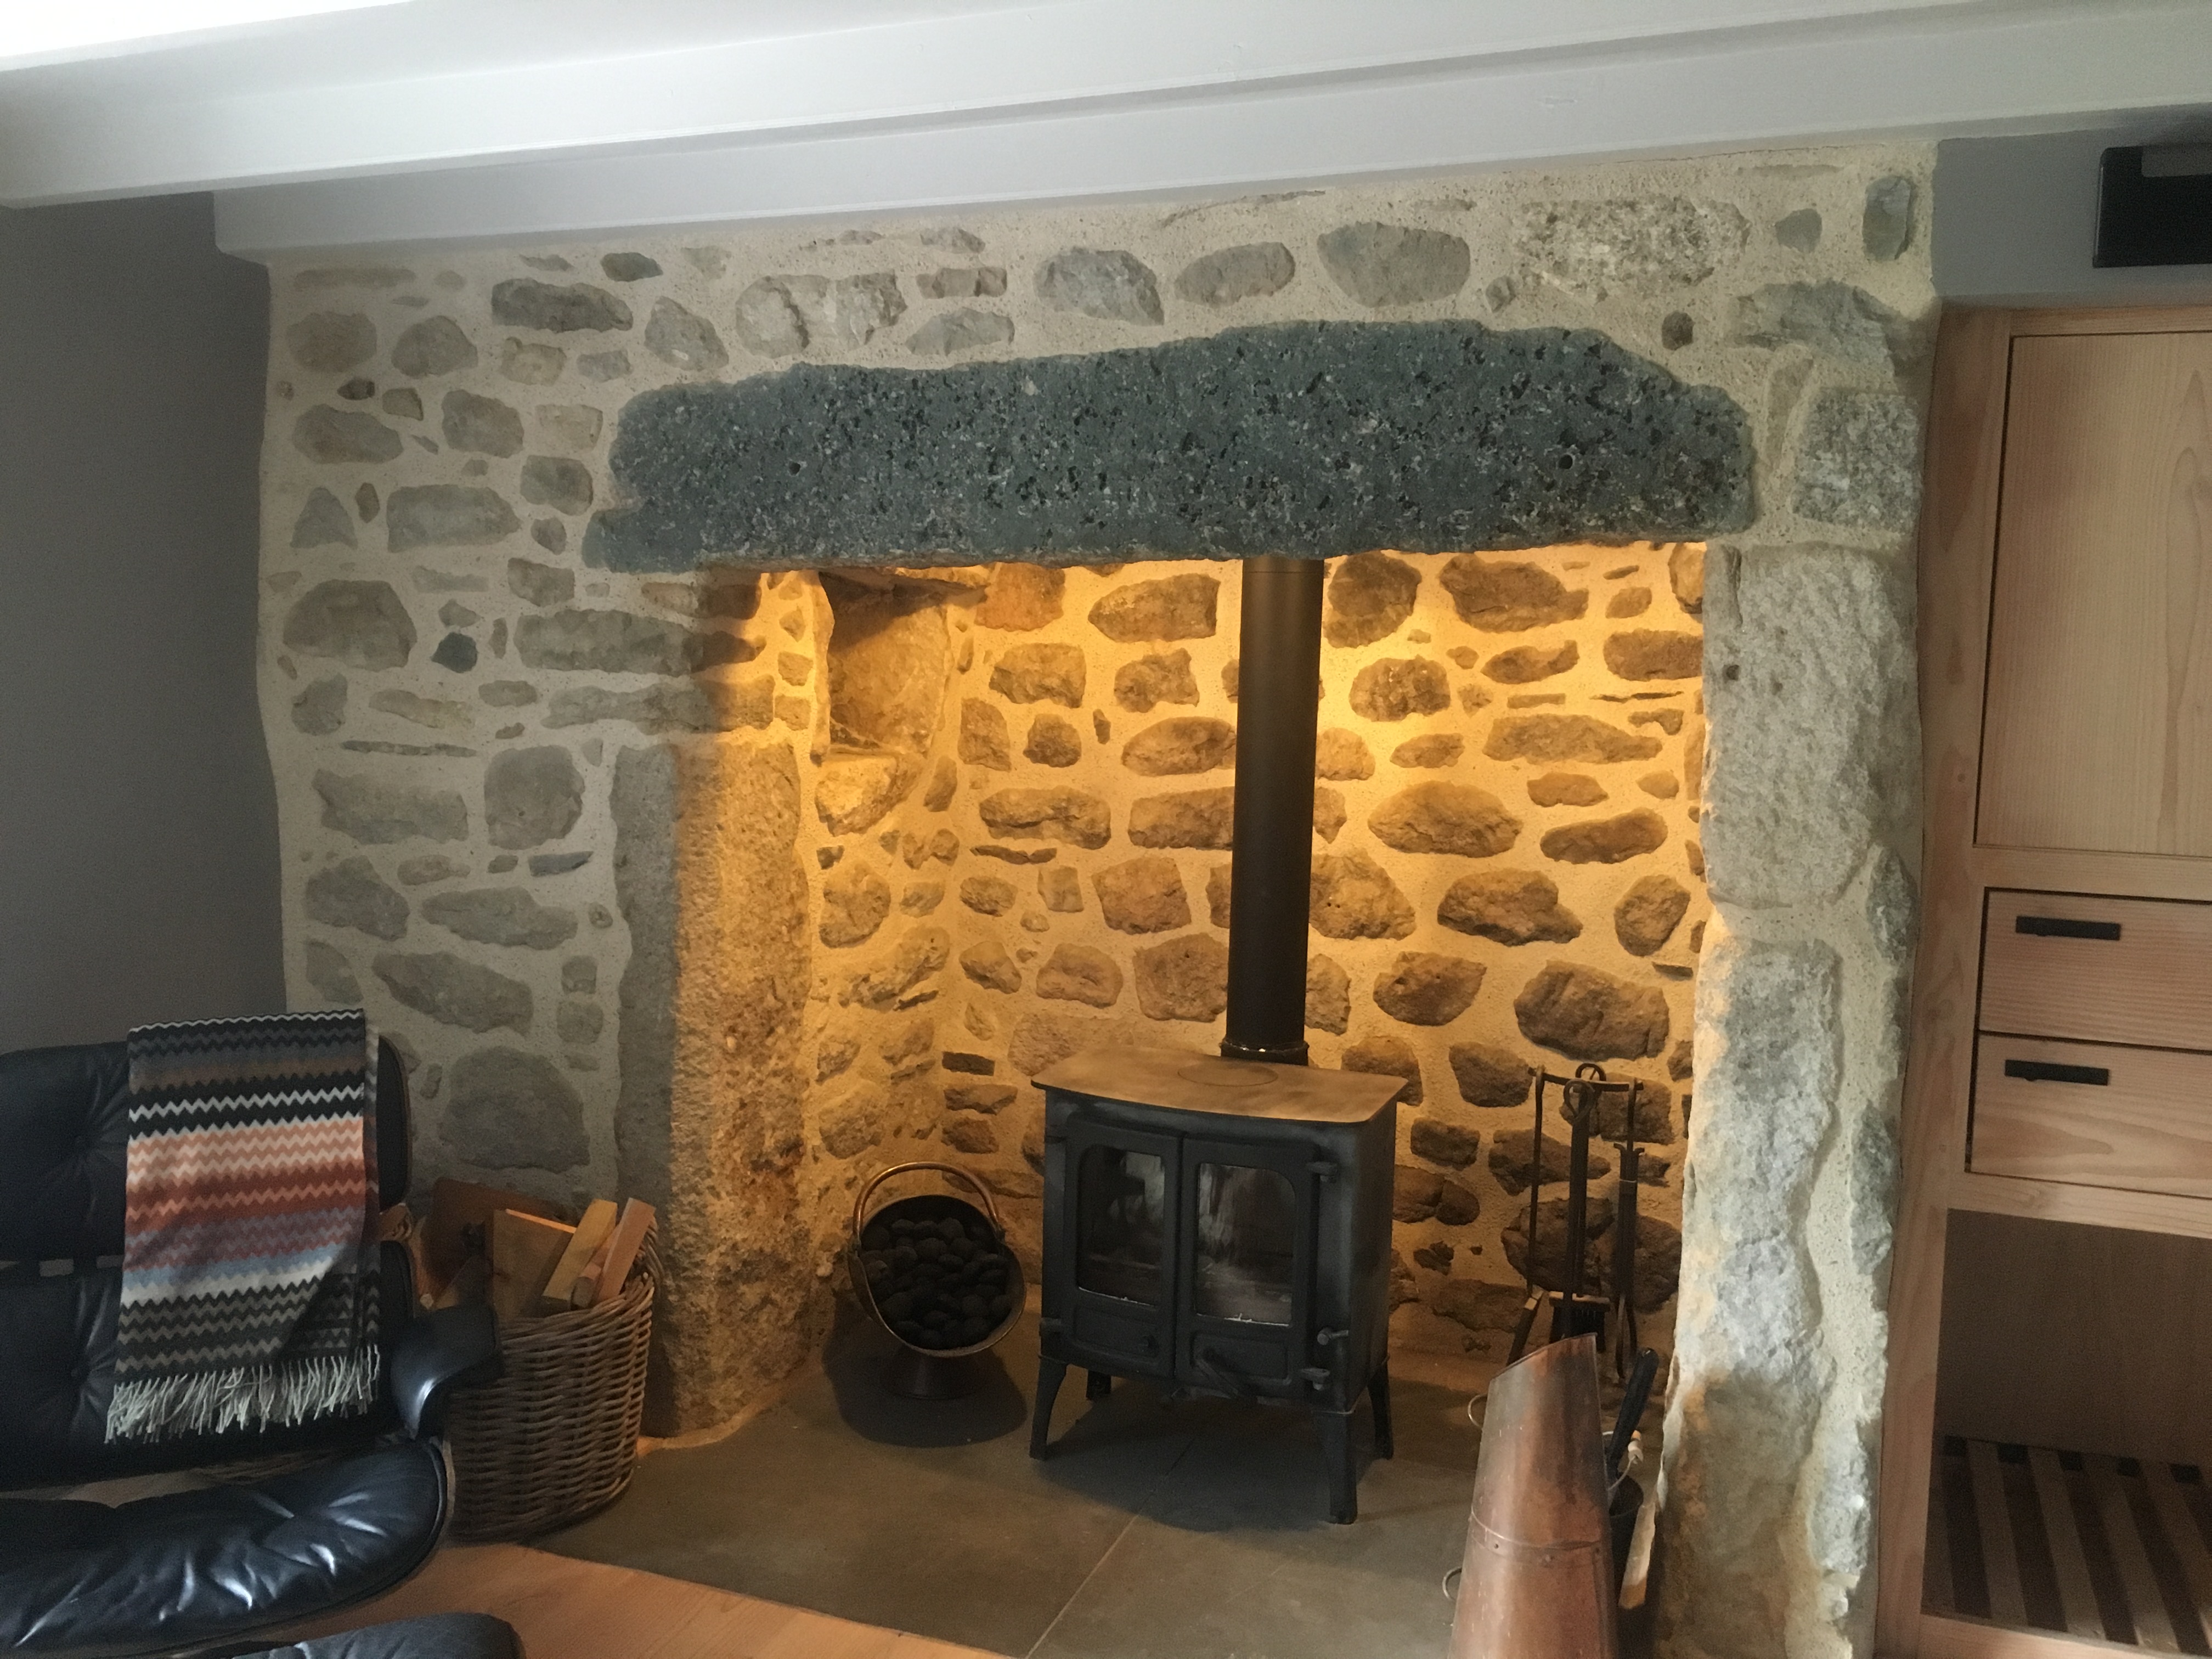 Fire place carefully renovated using lime mortar